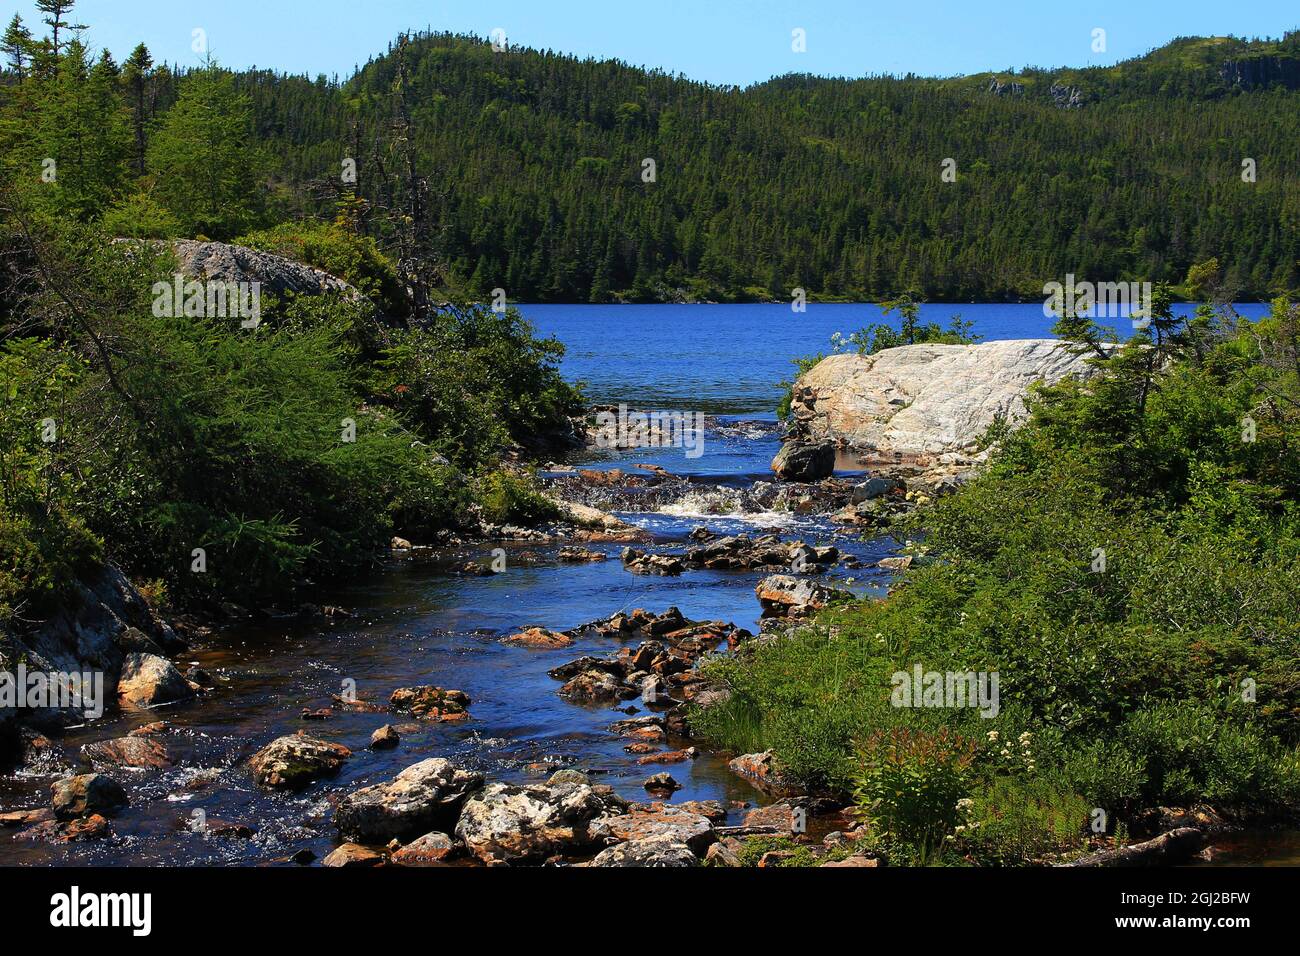 A small river running out of a pond enclosed by tree covered hills, New Bonaventure, Newfoundland Labrador. Stock Photo